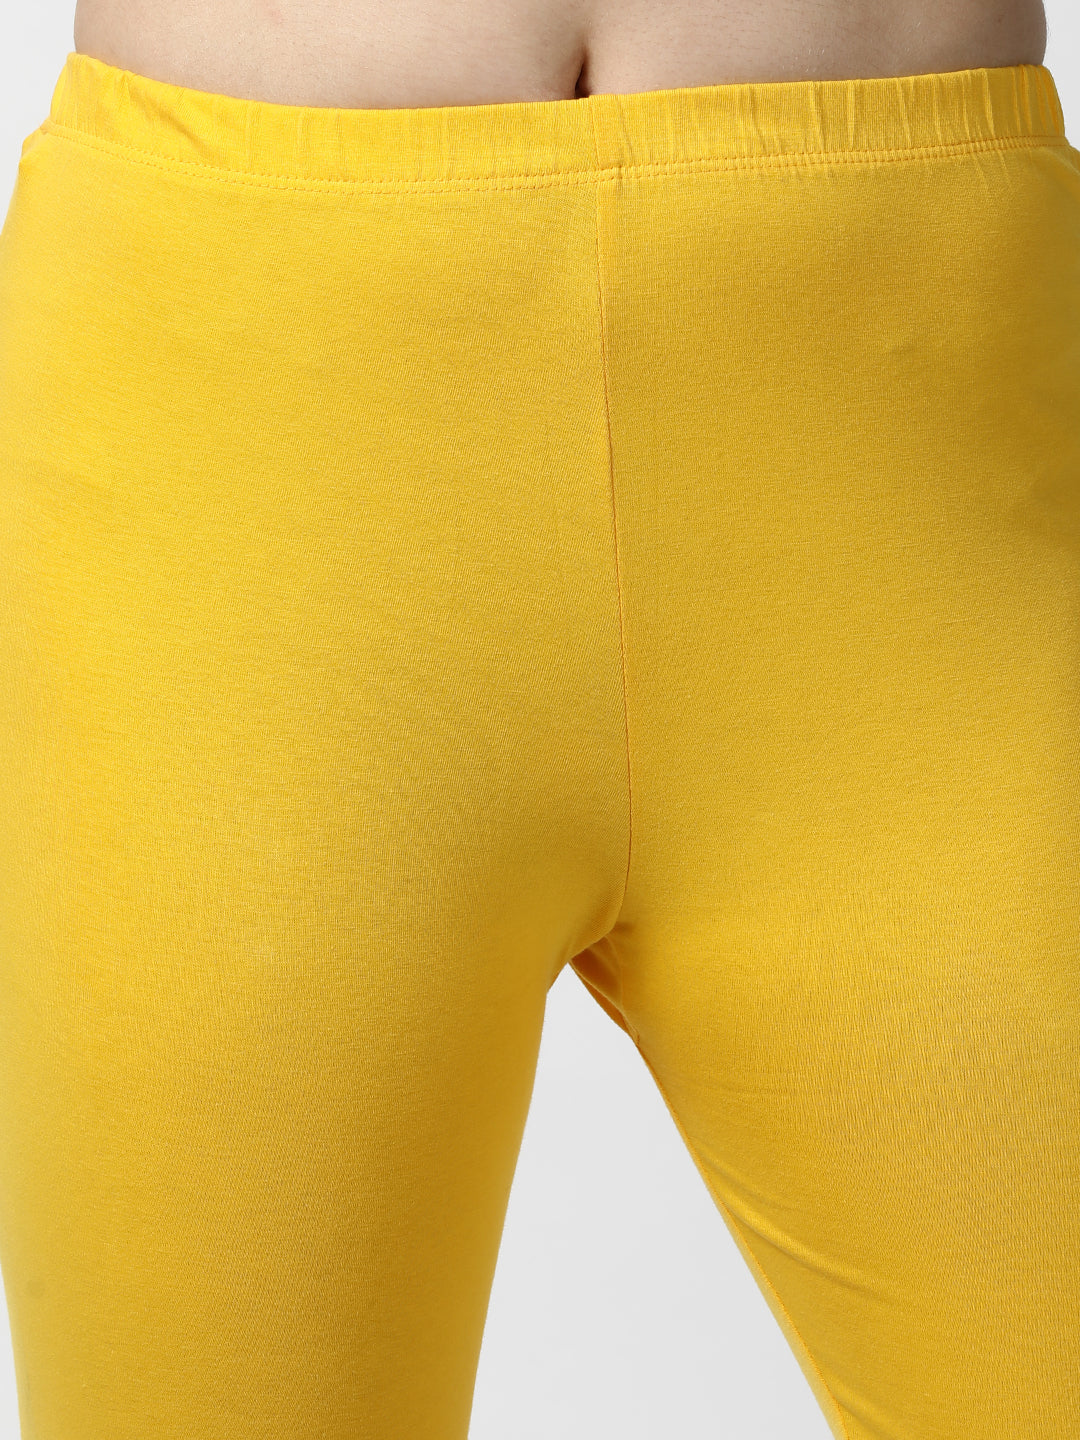  Stretch Is Comfort Girls Cotton Leggings Yellow XX-Small